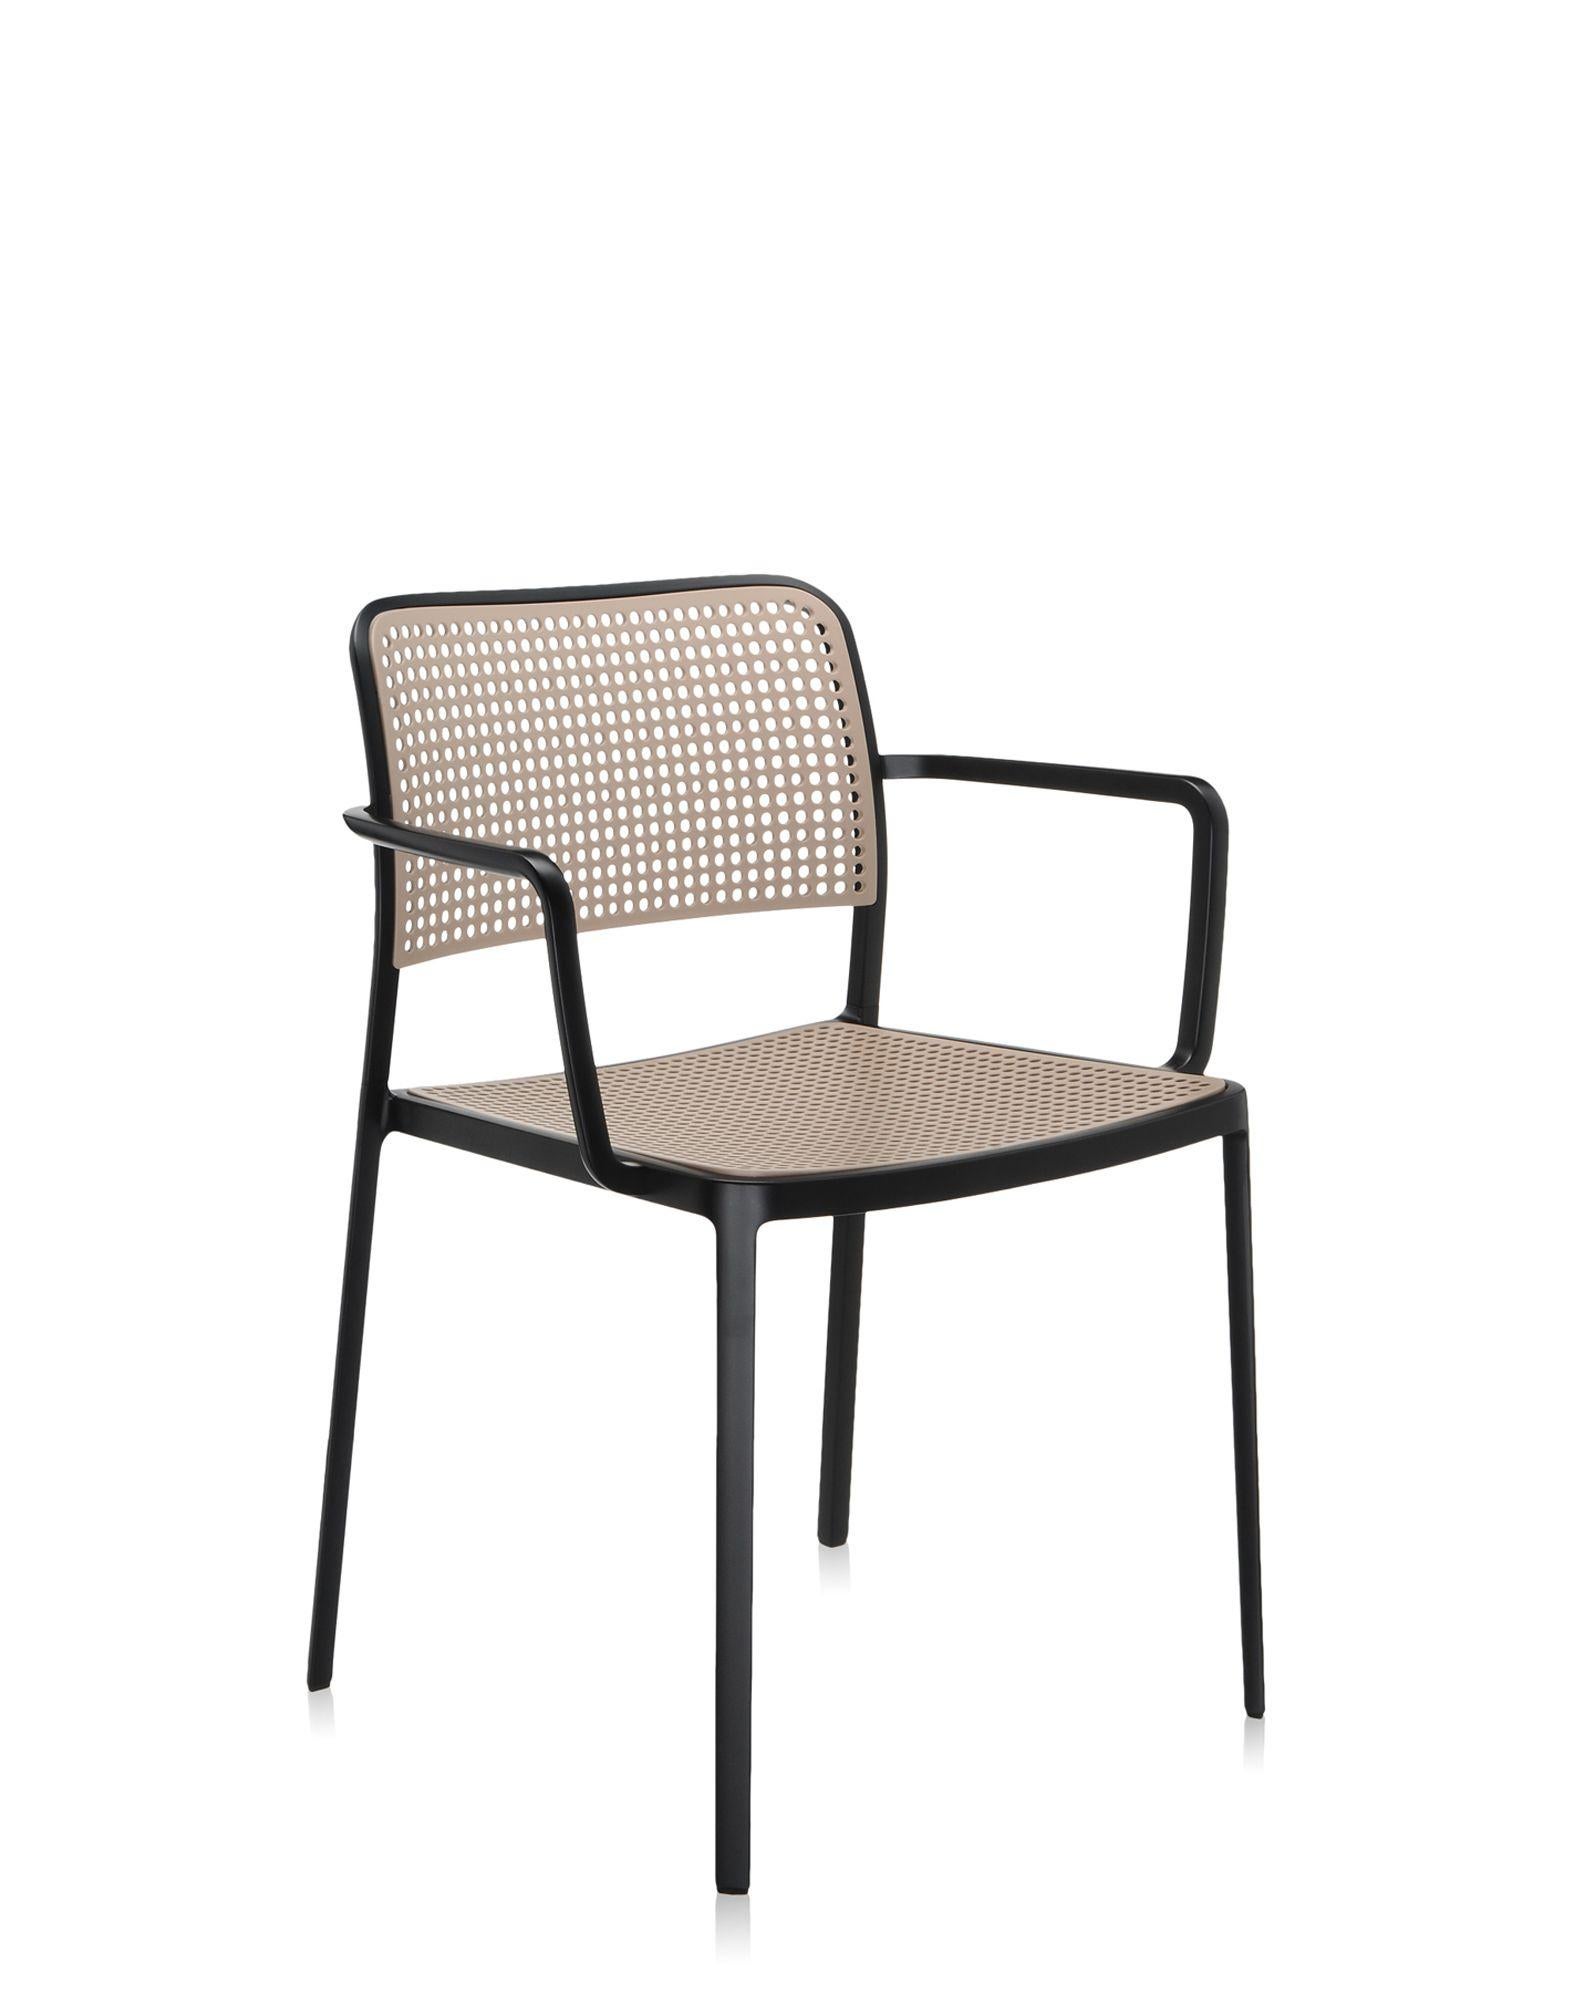 Audrey is a versatile and contemporary chair which because of its simple, clean lines obtained through a special die-casting process is composed of only two parts and made without welding. It is multifunctional and adaptable to all uses - indoor,